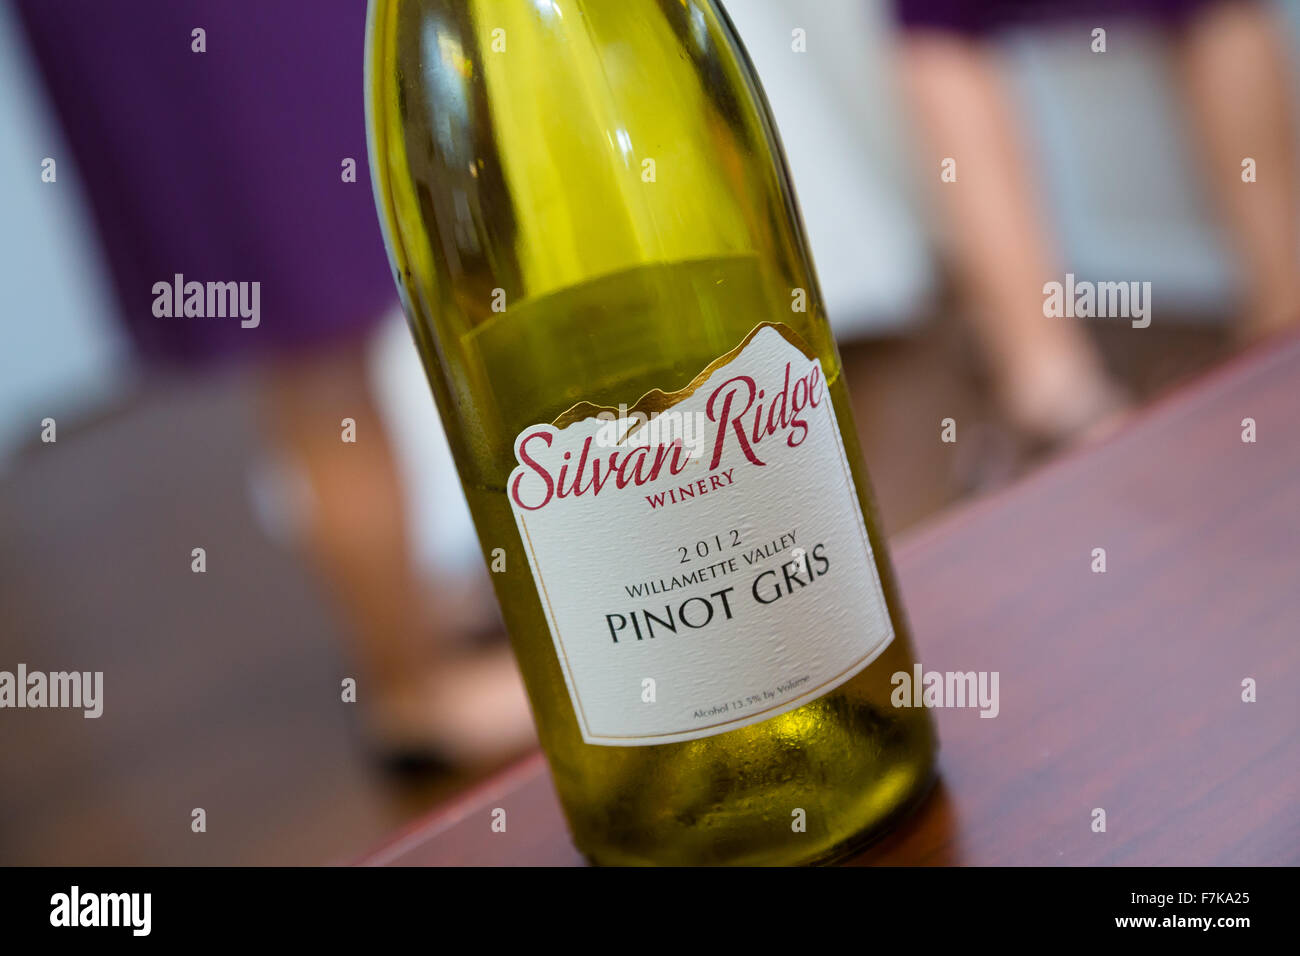 LORANE, OR - SEPTEMBER 6, 2014: Vintage 2012 Silvan Ridge Winery Pinot Gris from the Willamette Valley in bottle. Stock Photo